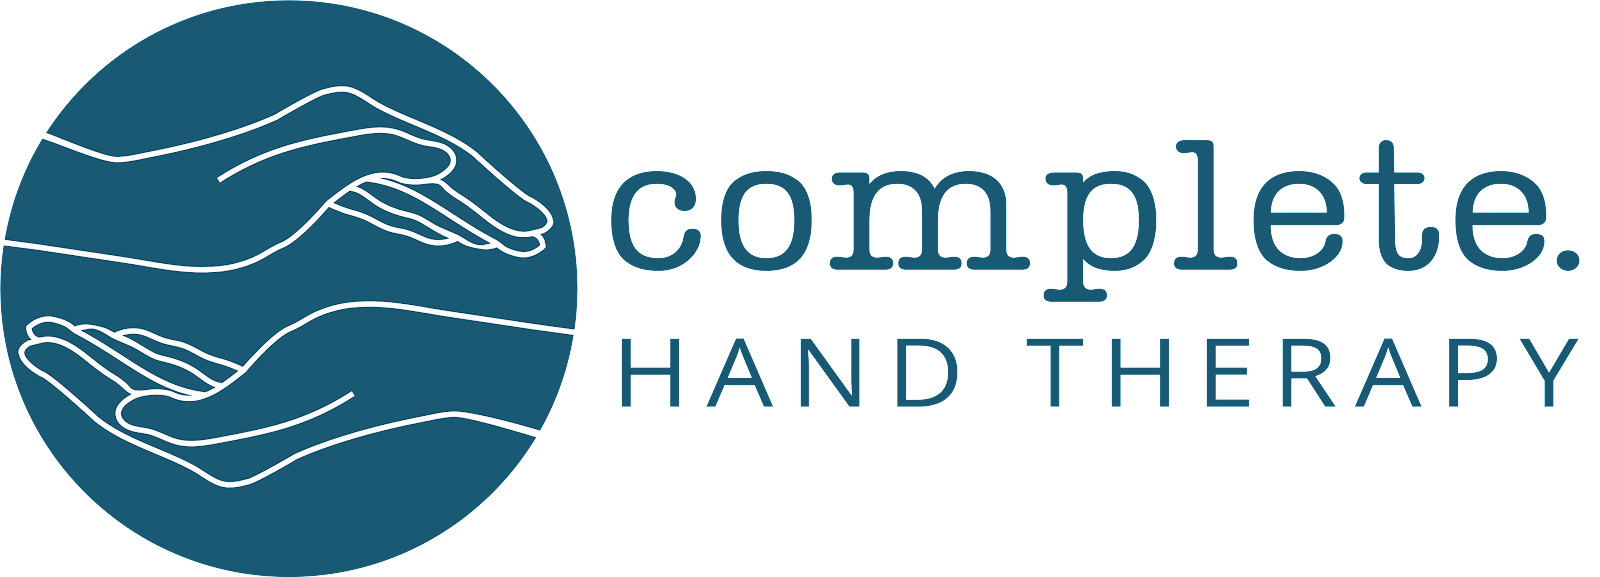 Complete Hand Therapy